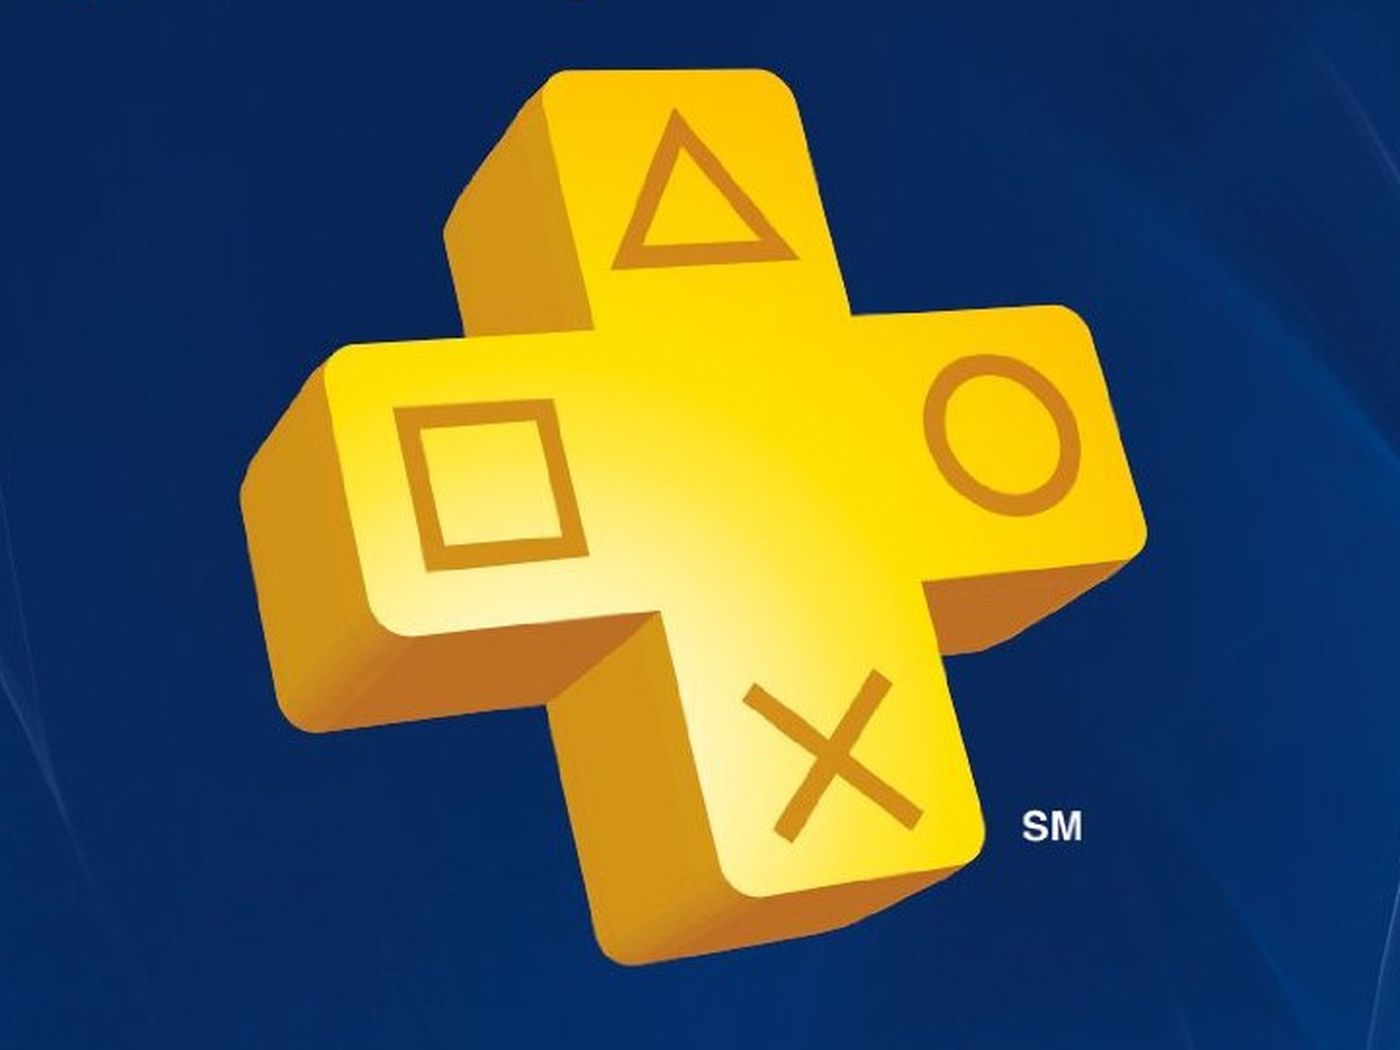 PlayStation Plus gave out $150 in free games in 2016. Were they